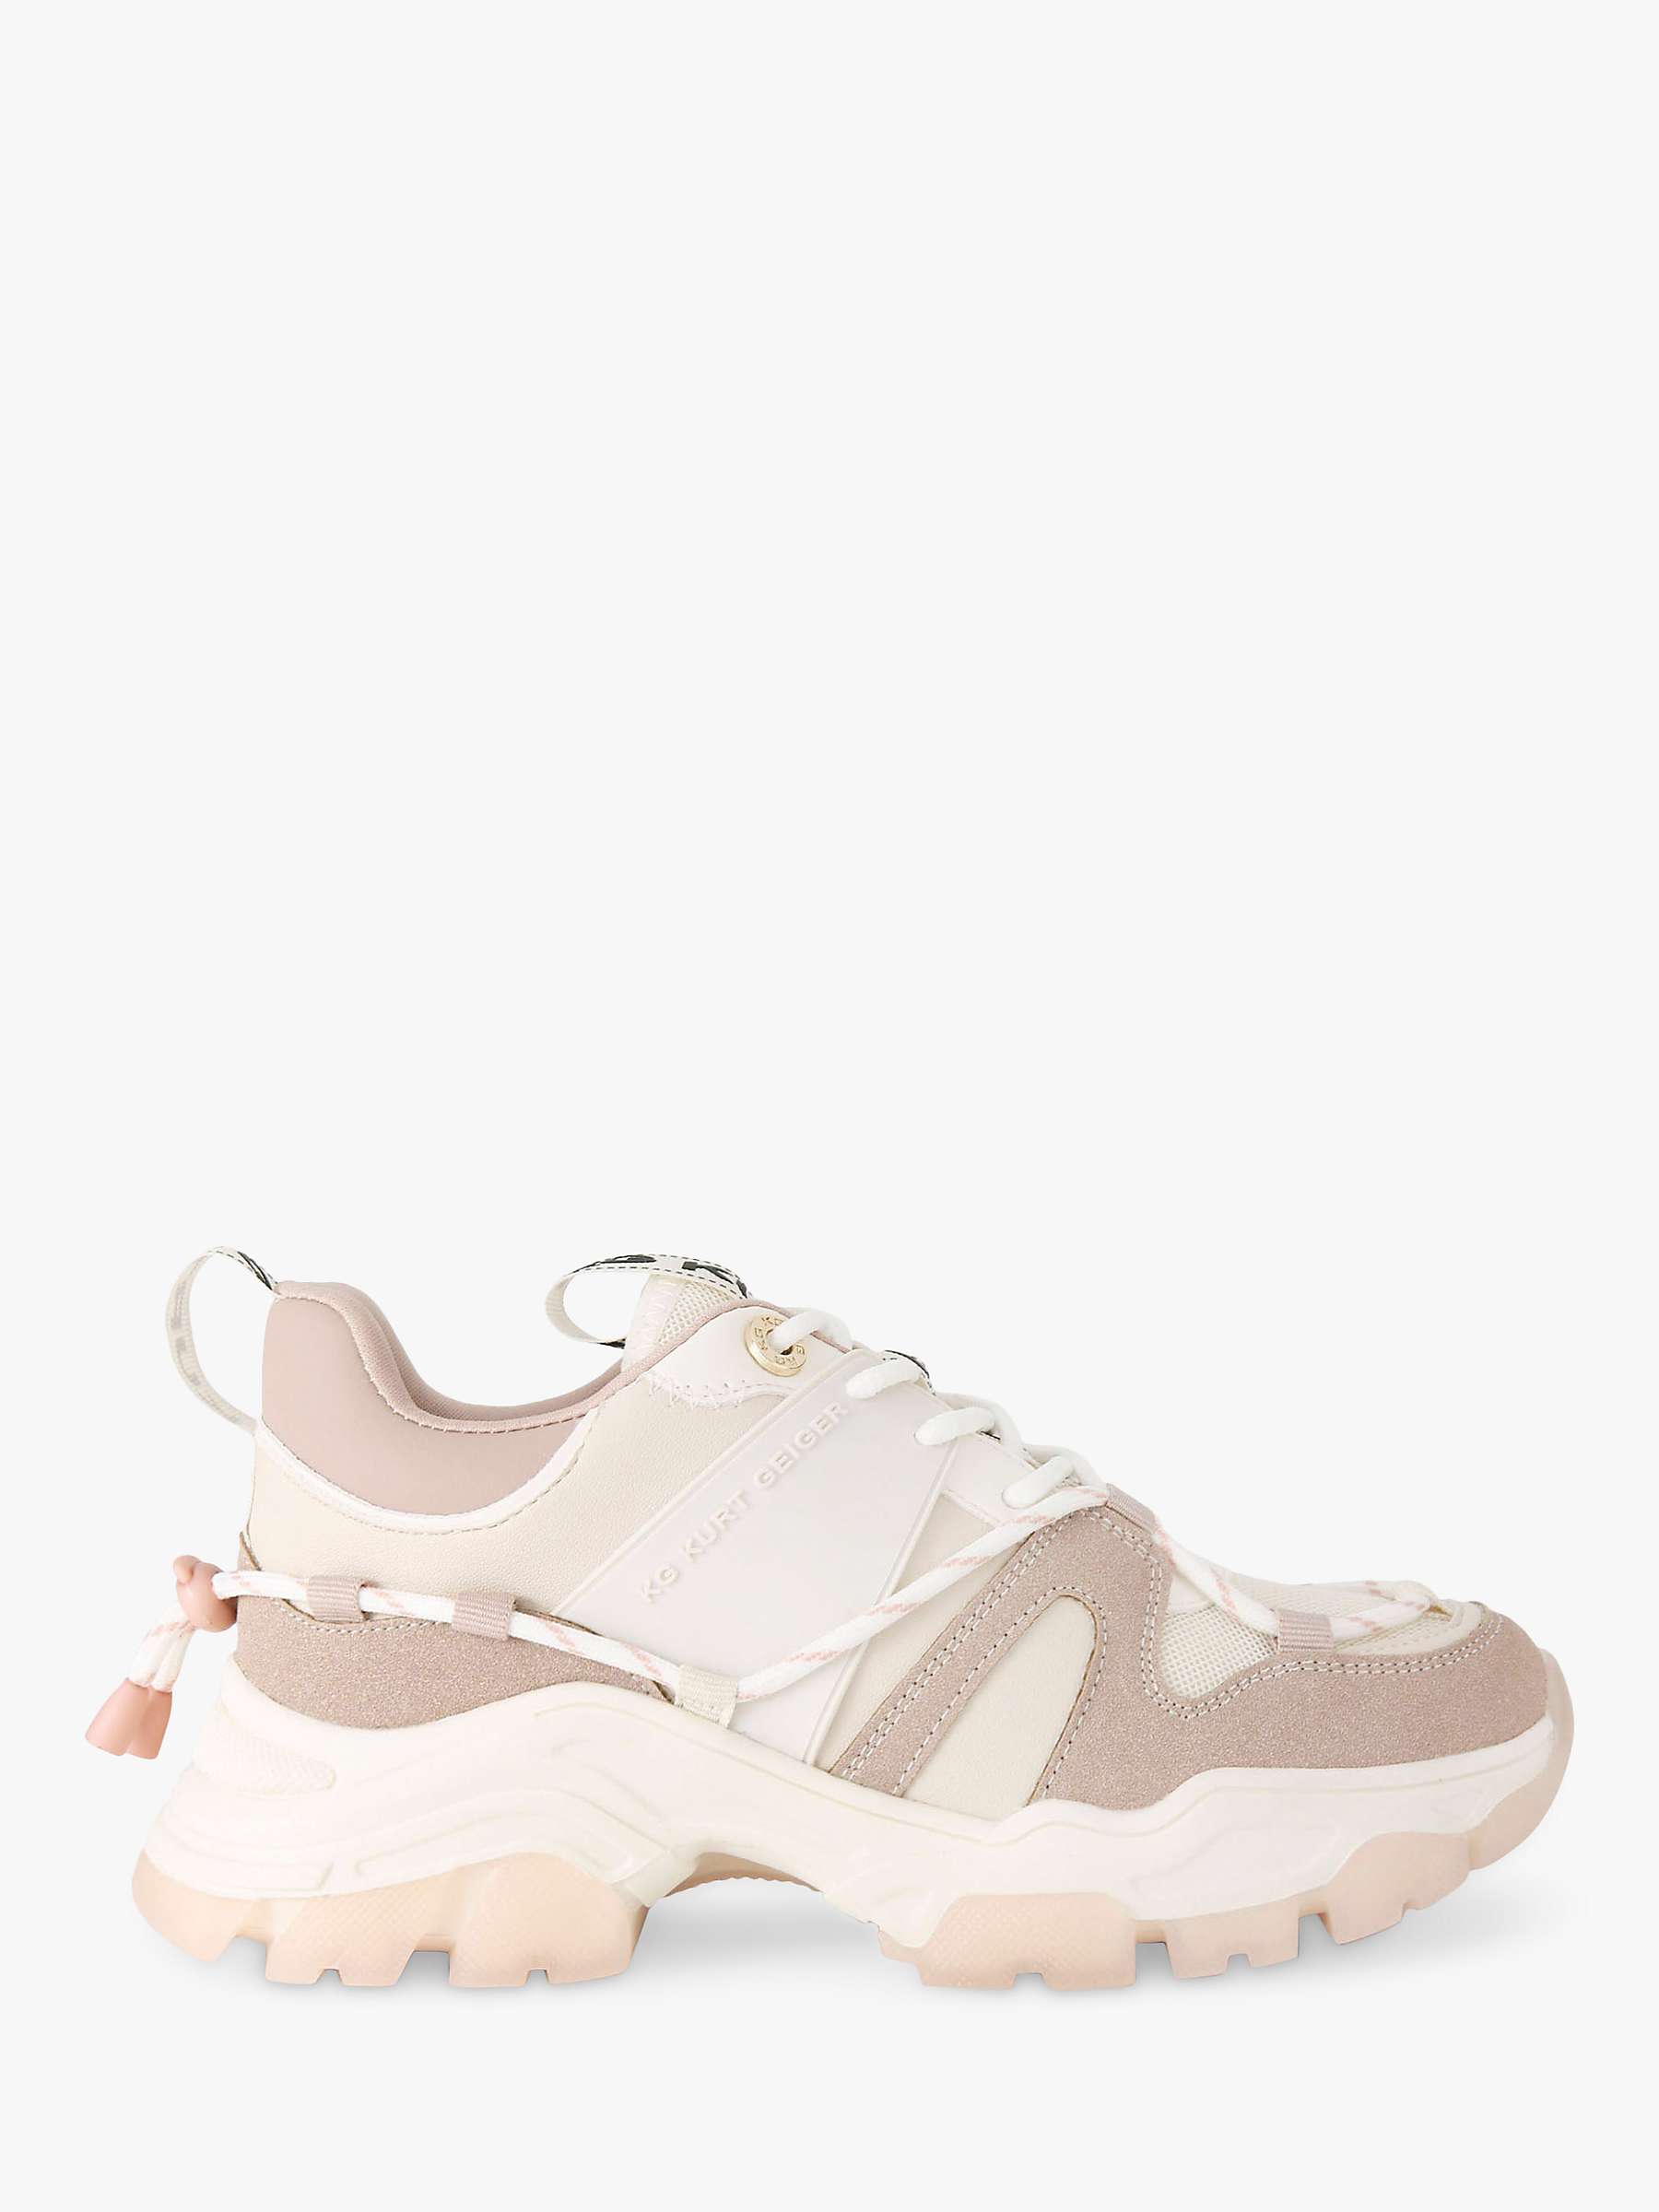 Buy KG Kurt Geiger Limitless 3 Chunky Sole Trainers, Pink/Multi Online at johnlewis.com